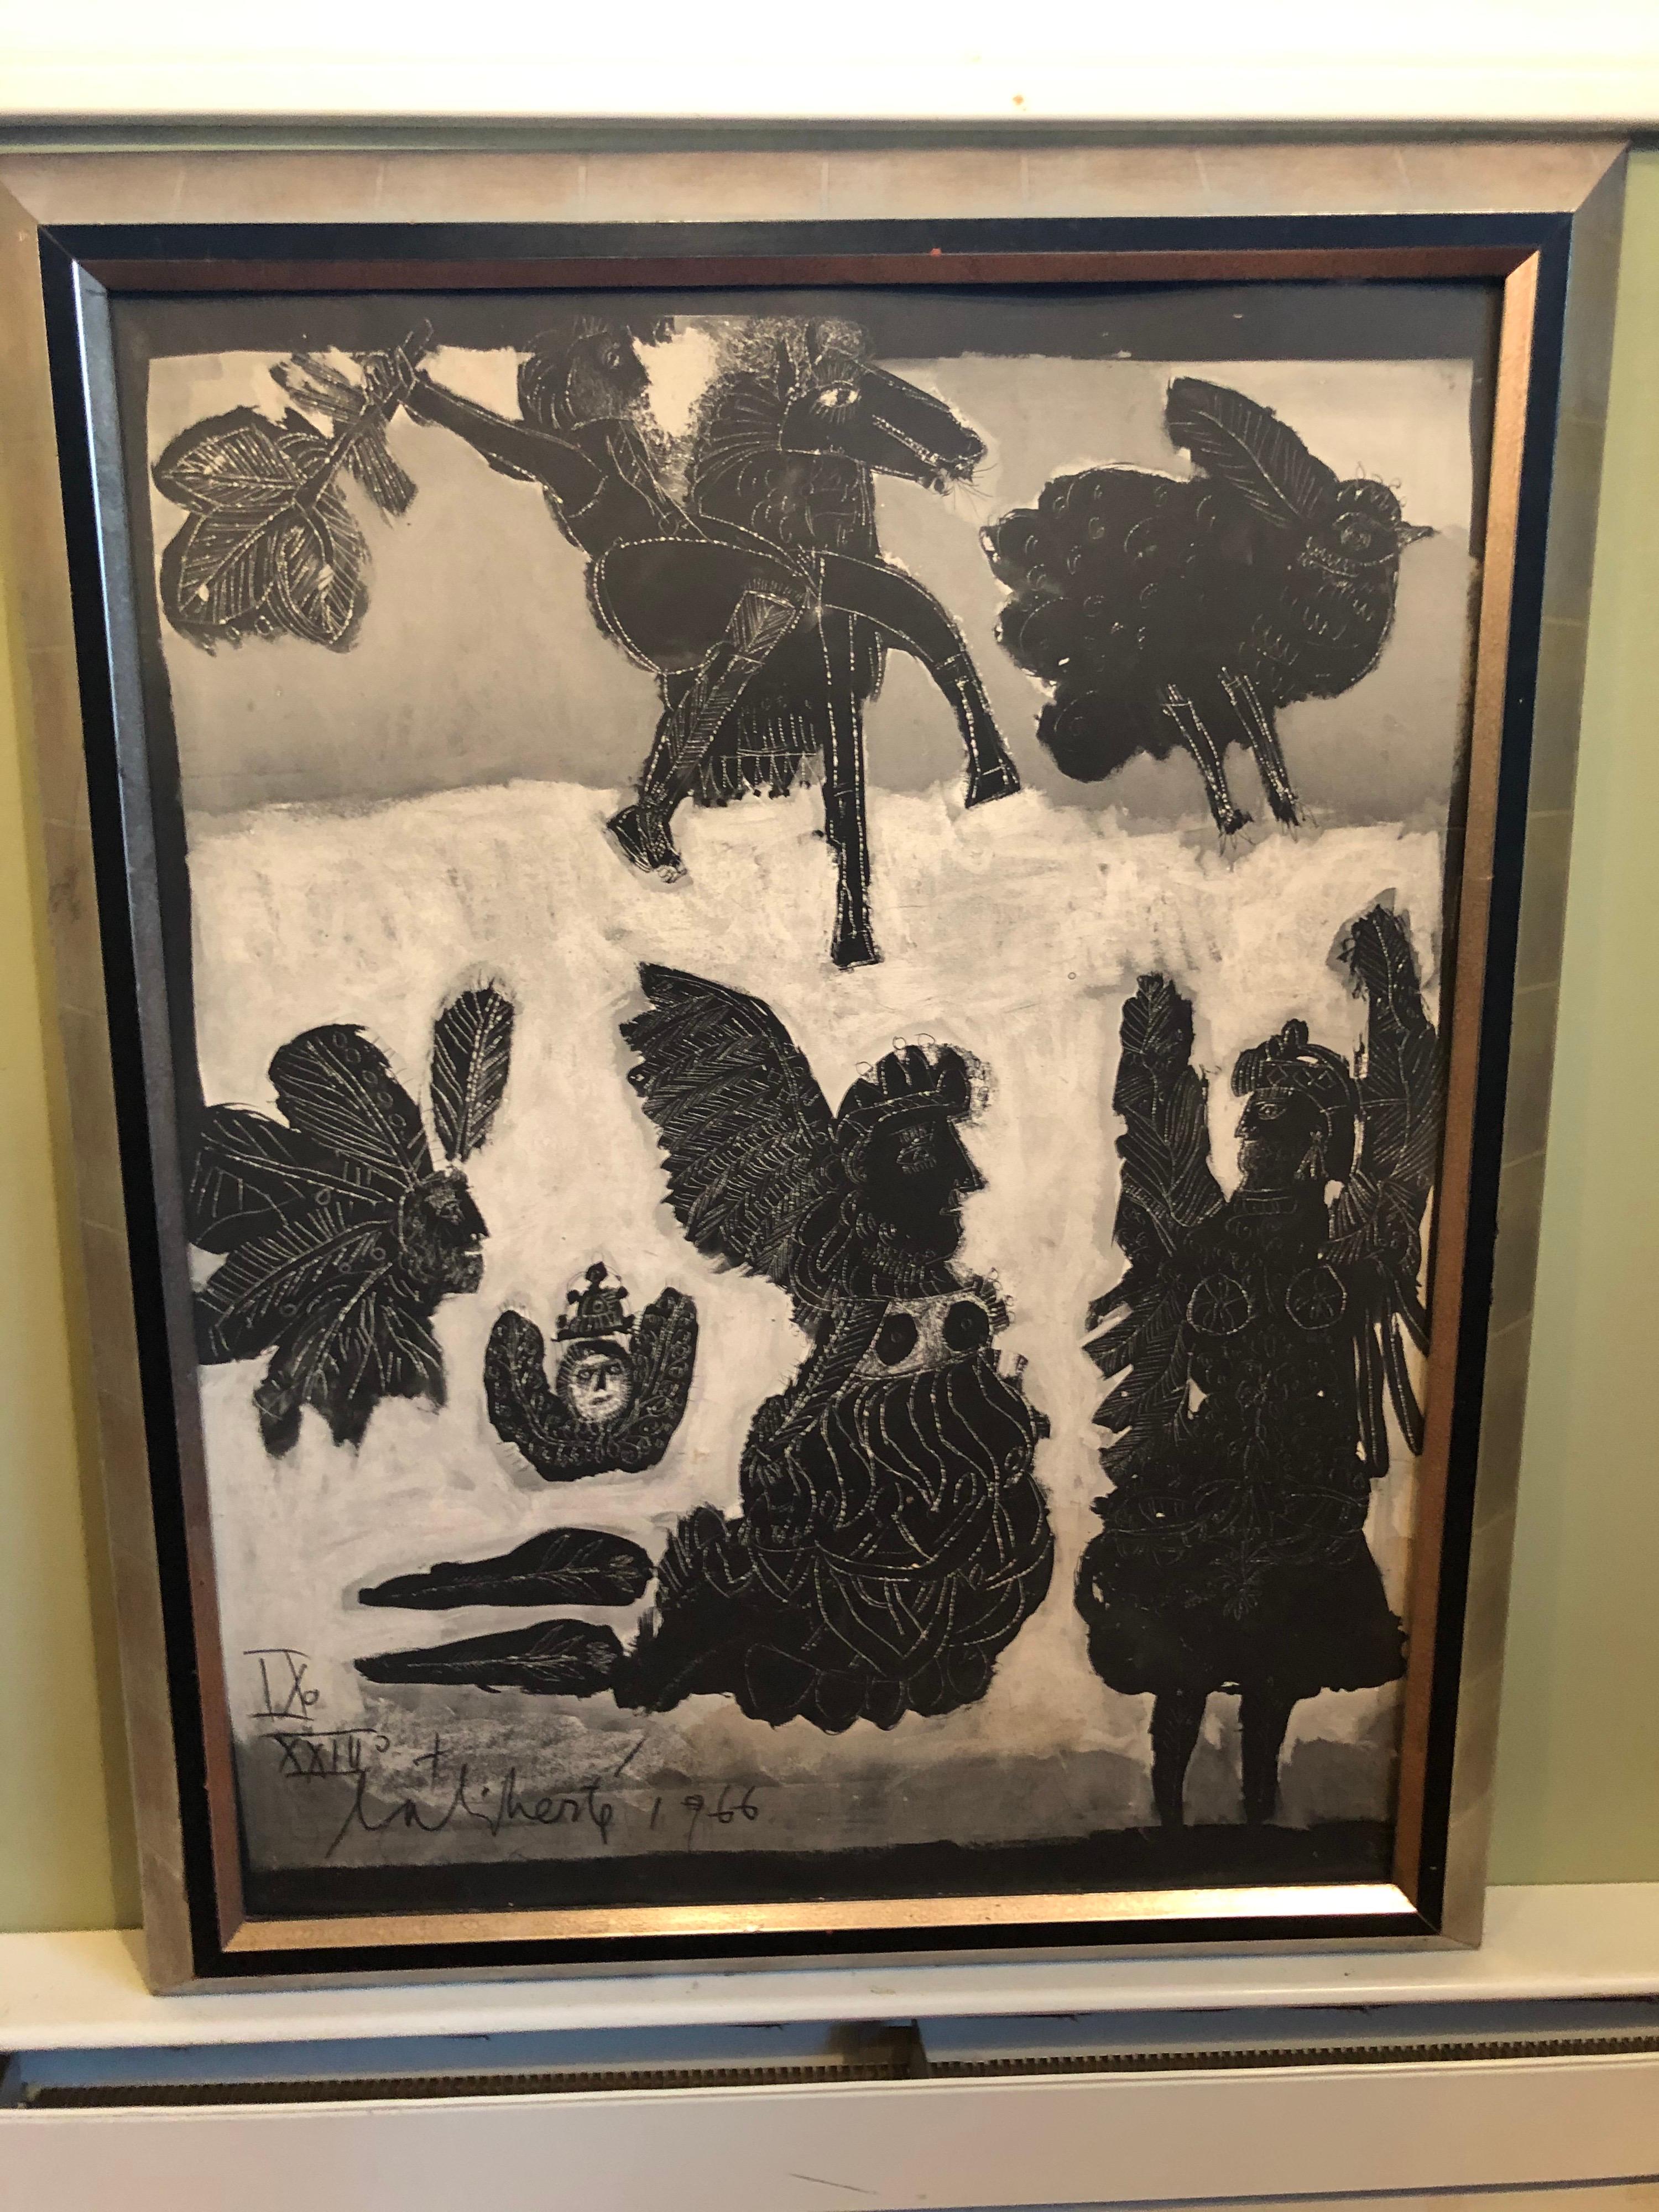 Signed 1966 Norman Laliberte Framed Posterboard Print. Lovely, whimsical style so characteristic of Norman La Liberte. With angelic like figures with wings and birds floating around. Framed but the board is open. No glass front. Silver leaf style